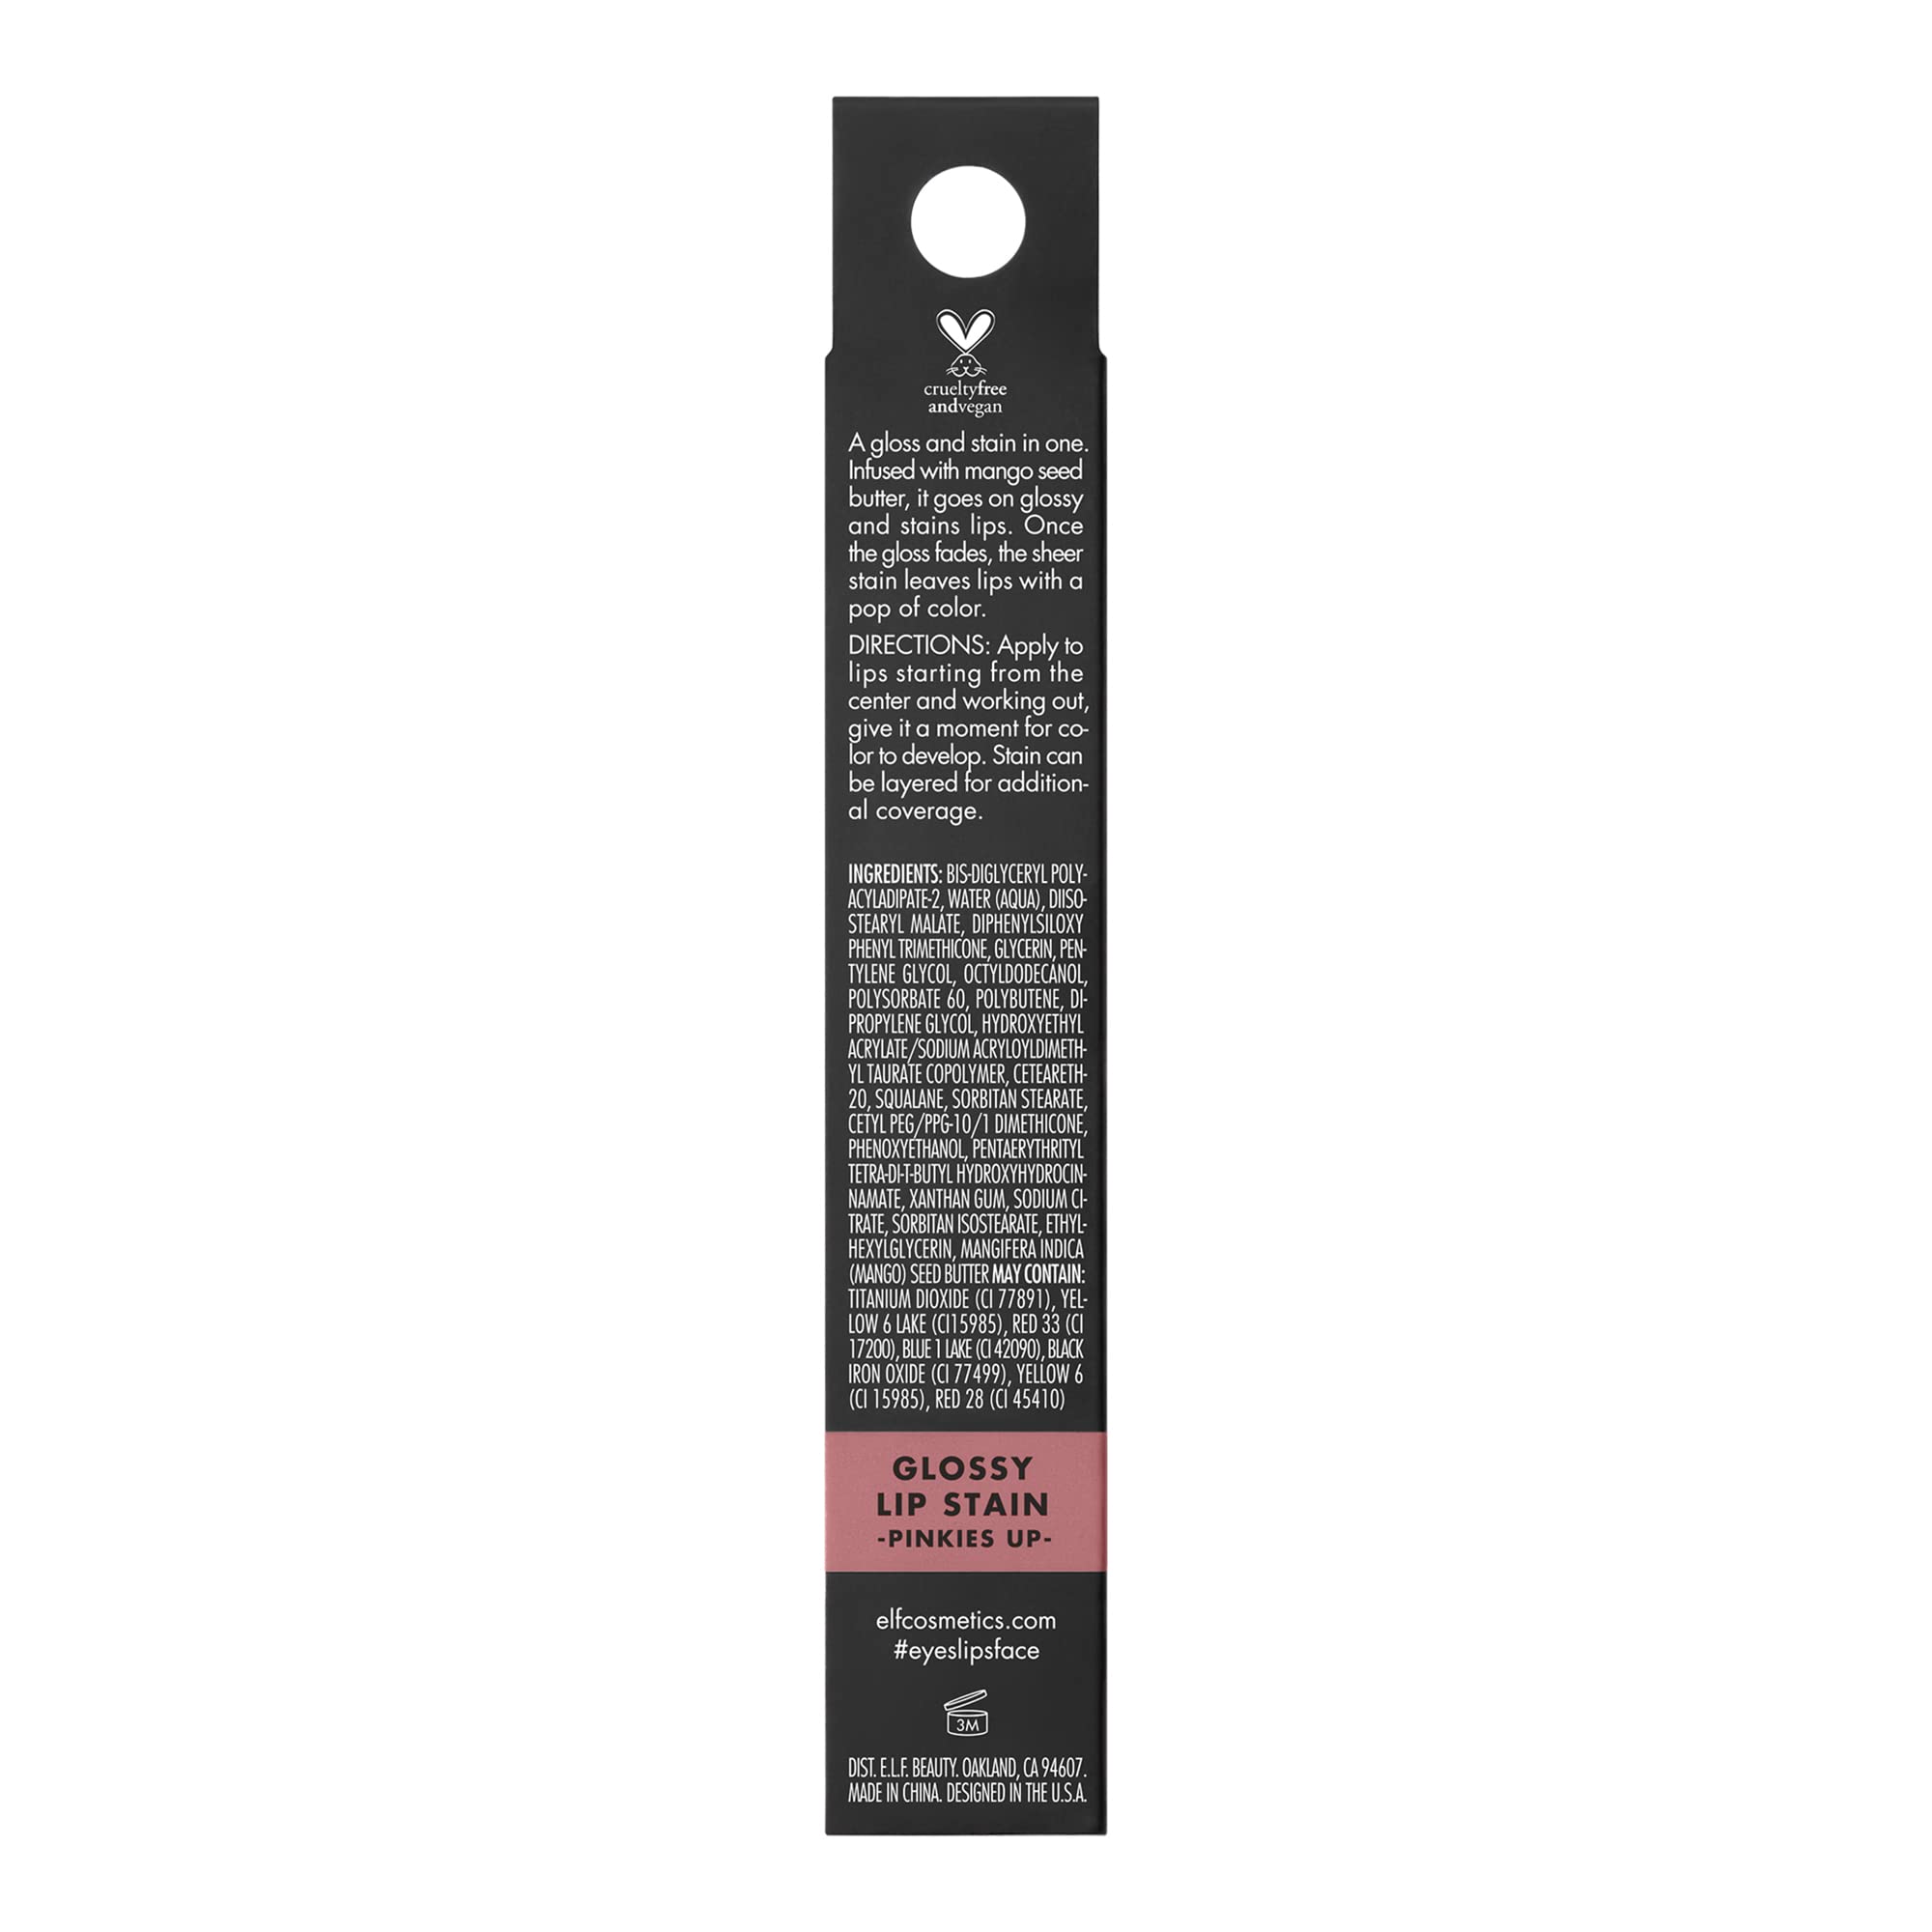 e.l.f. Cosmetics Glossy Lip Stain, Lightweight, Long-Wear Lip Stain For A Sheer Pop Of Color & Subtle Gloss Effect, Pinkies Up, 0.10 Ounce (Pack of 1)